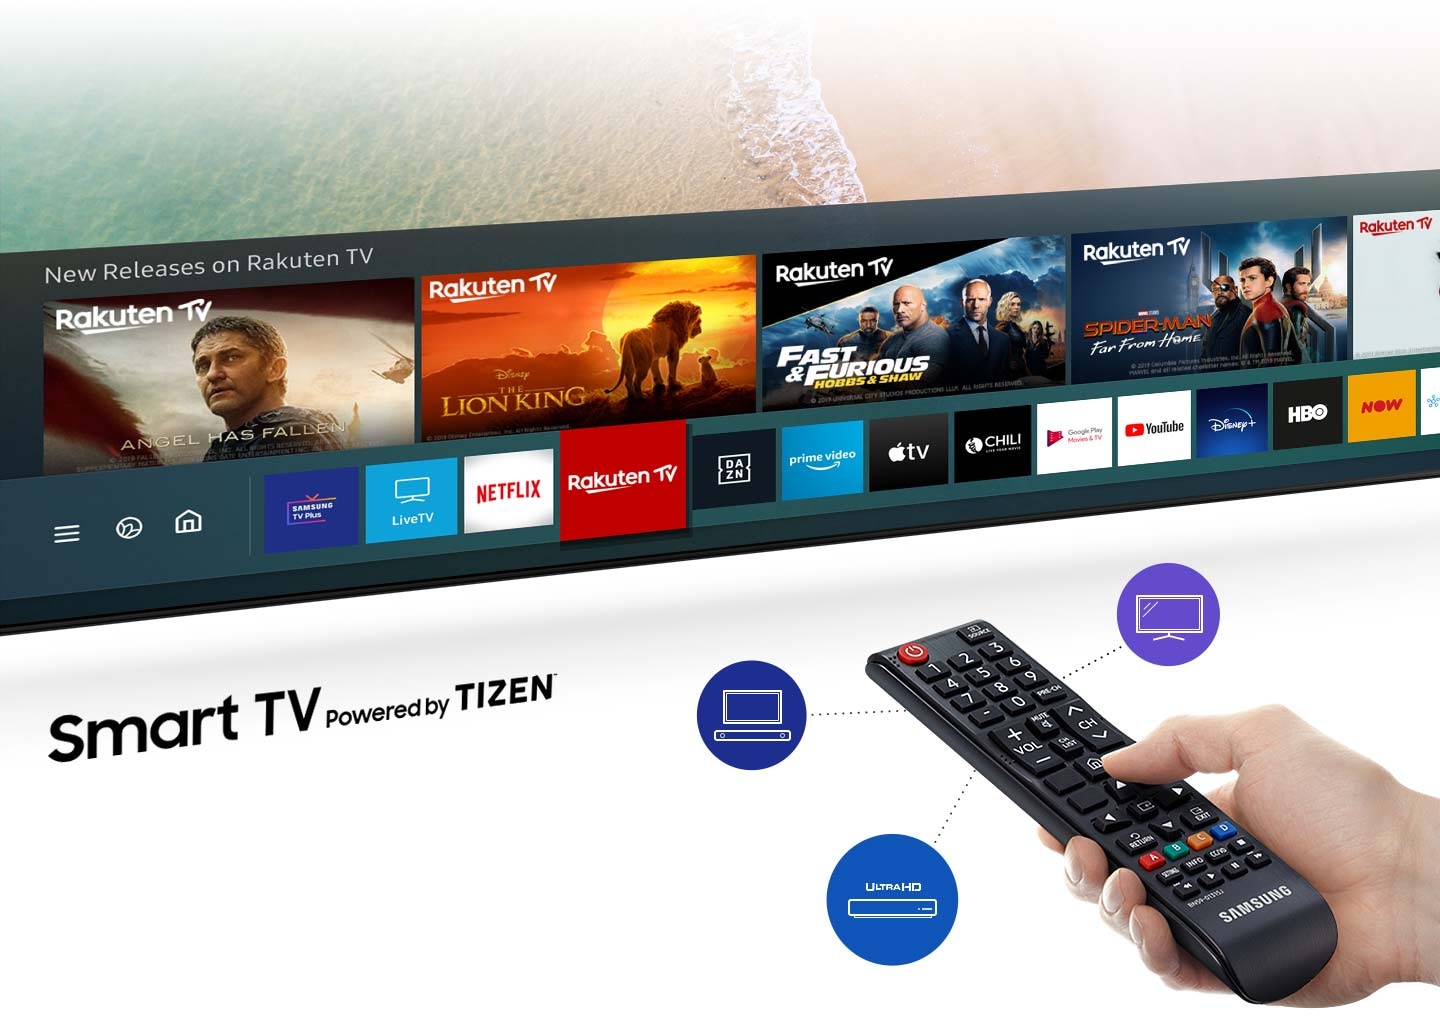 Find tons of content with a remote control